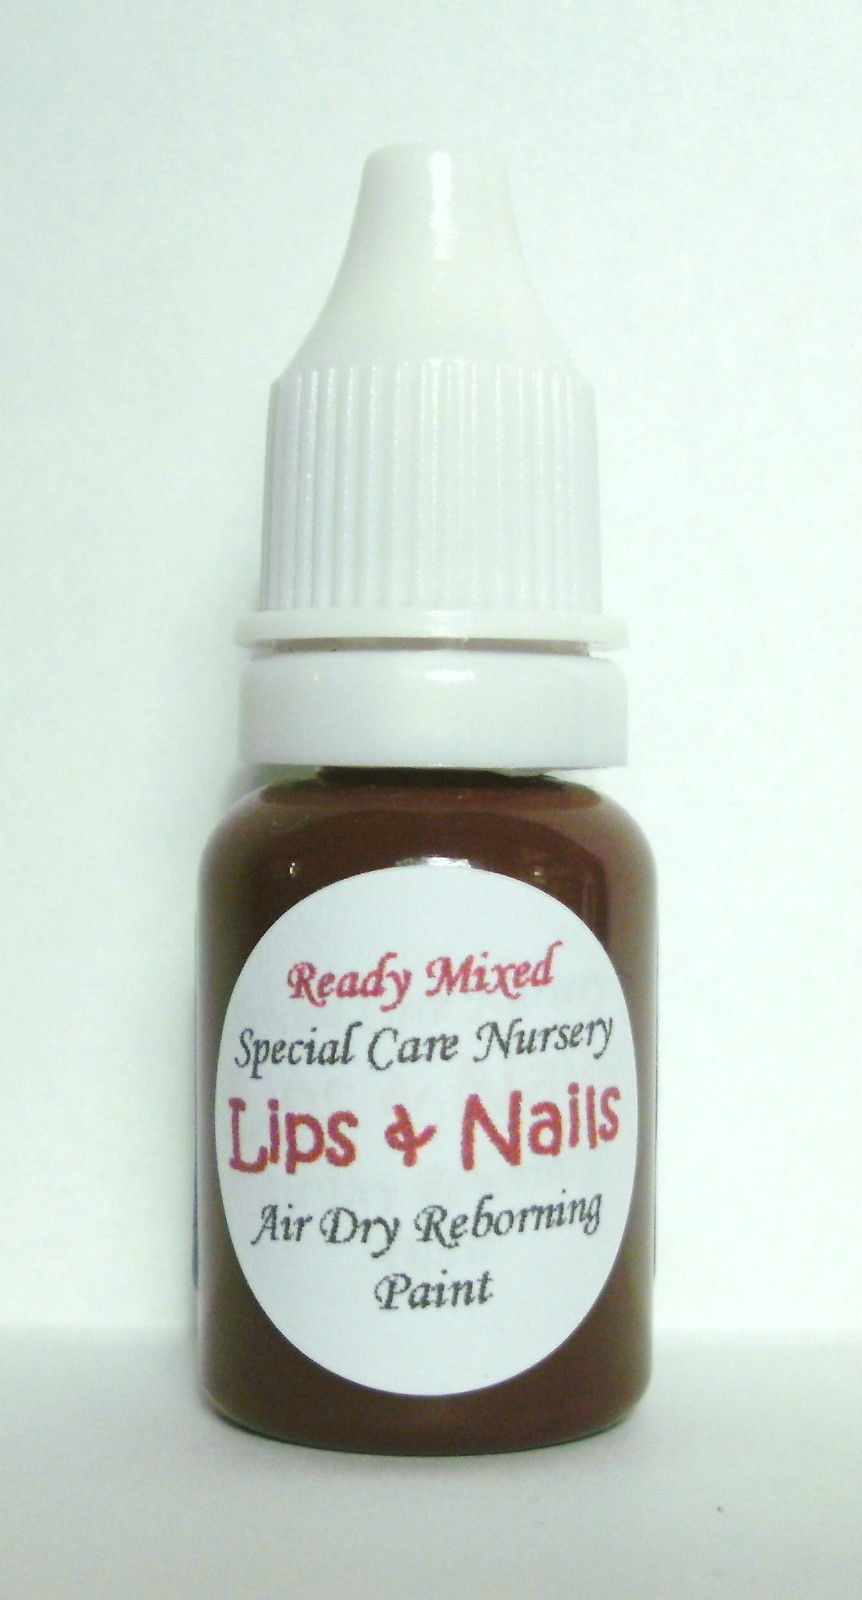 Special Care Nursery Air dry paints - * The Detailing paints* - 10ml Lips a